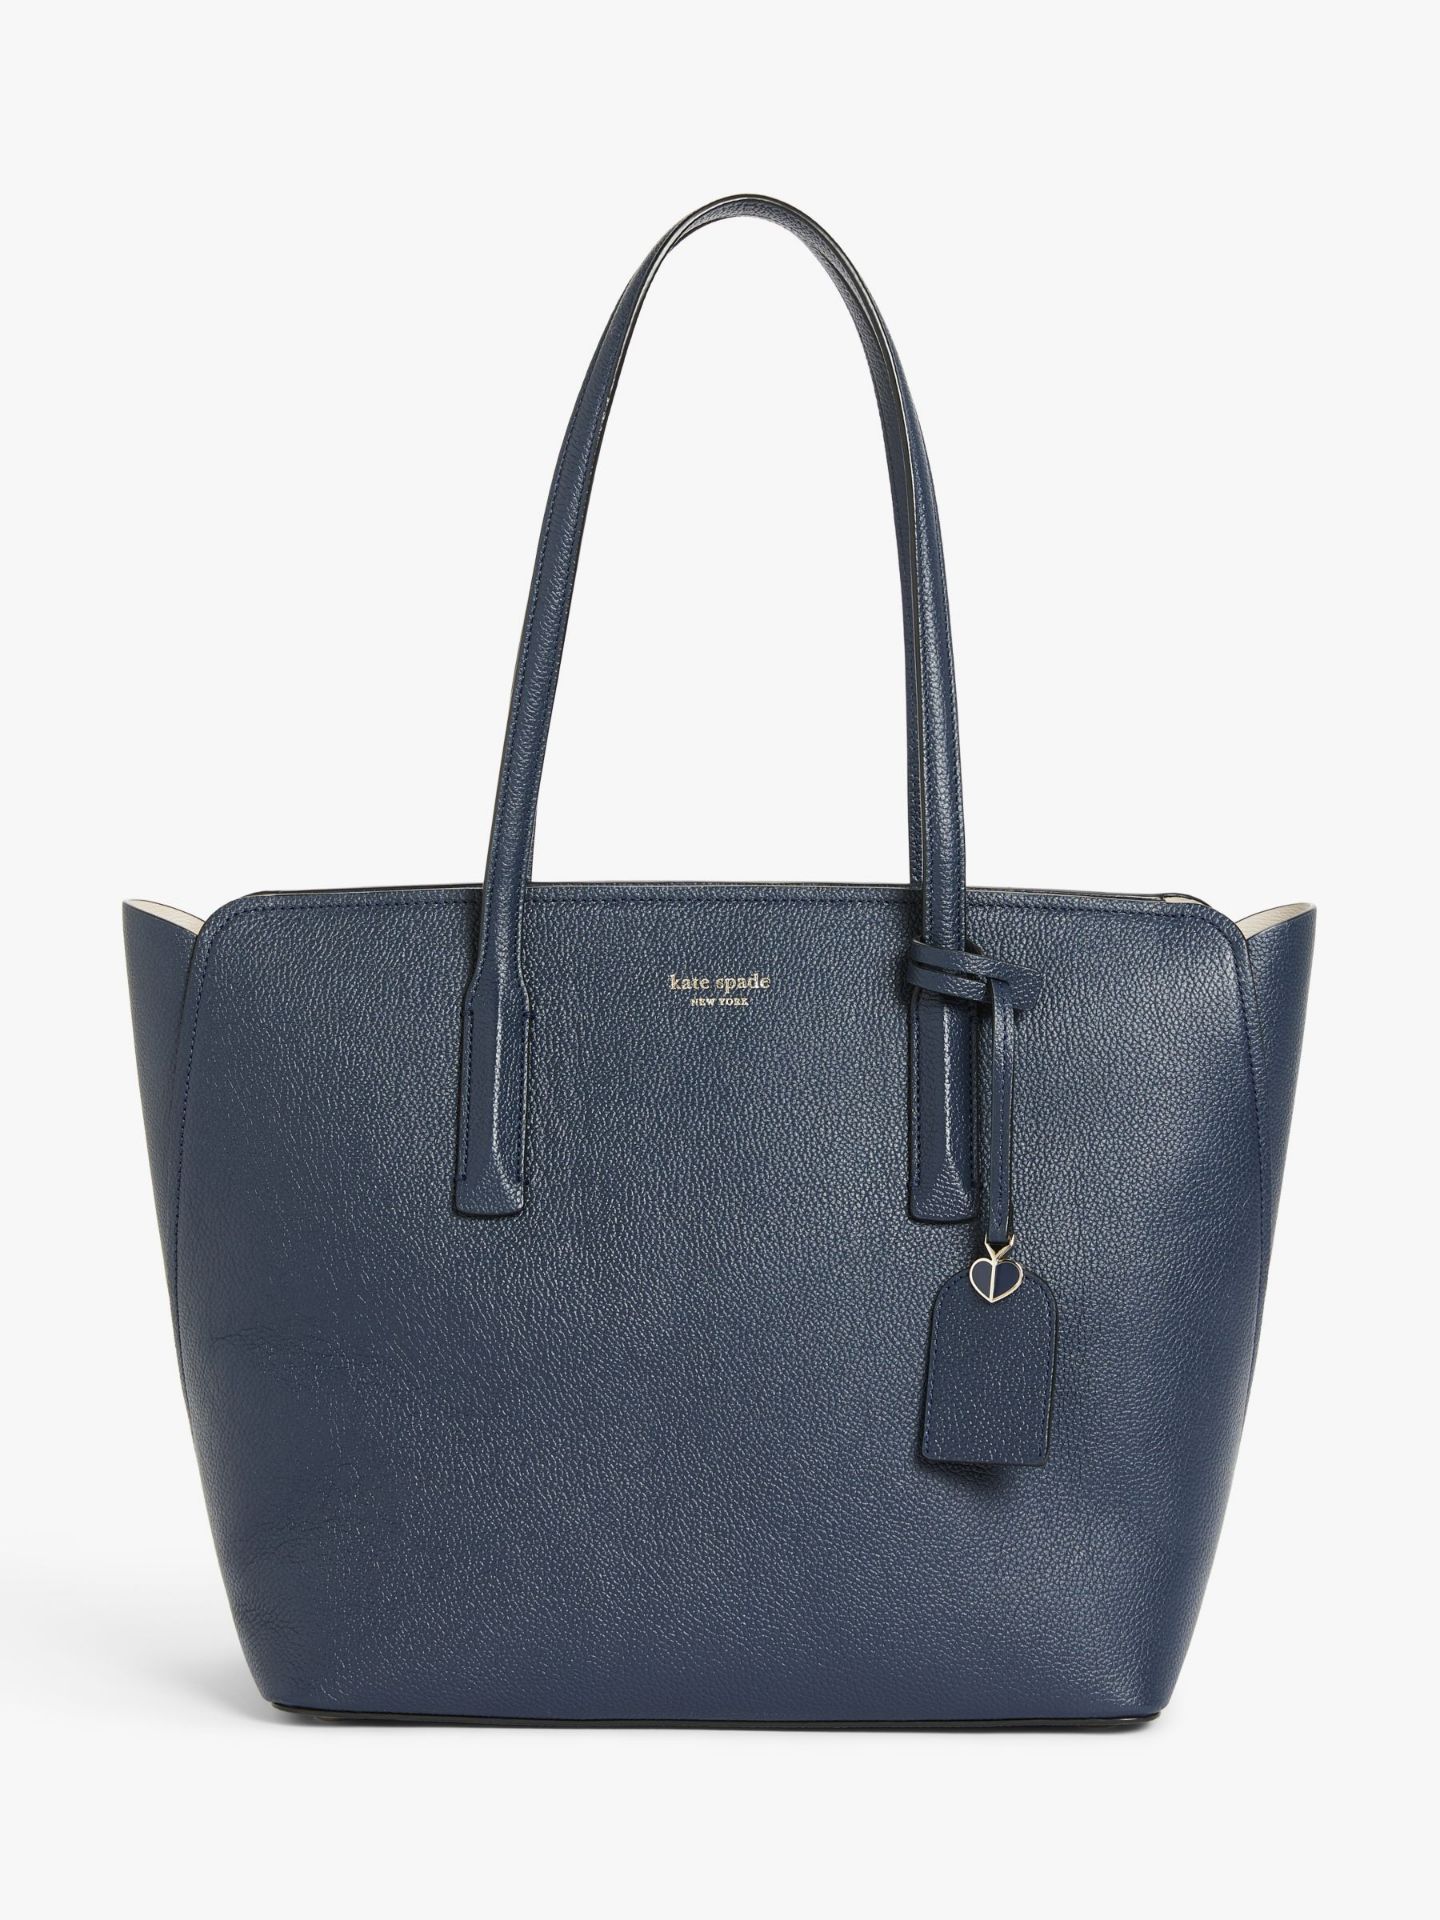 Kate spade new york Margaux Leather Bag